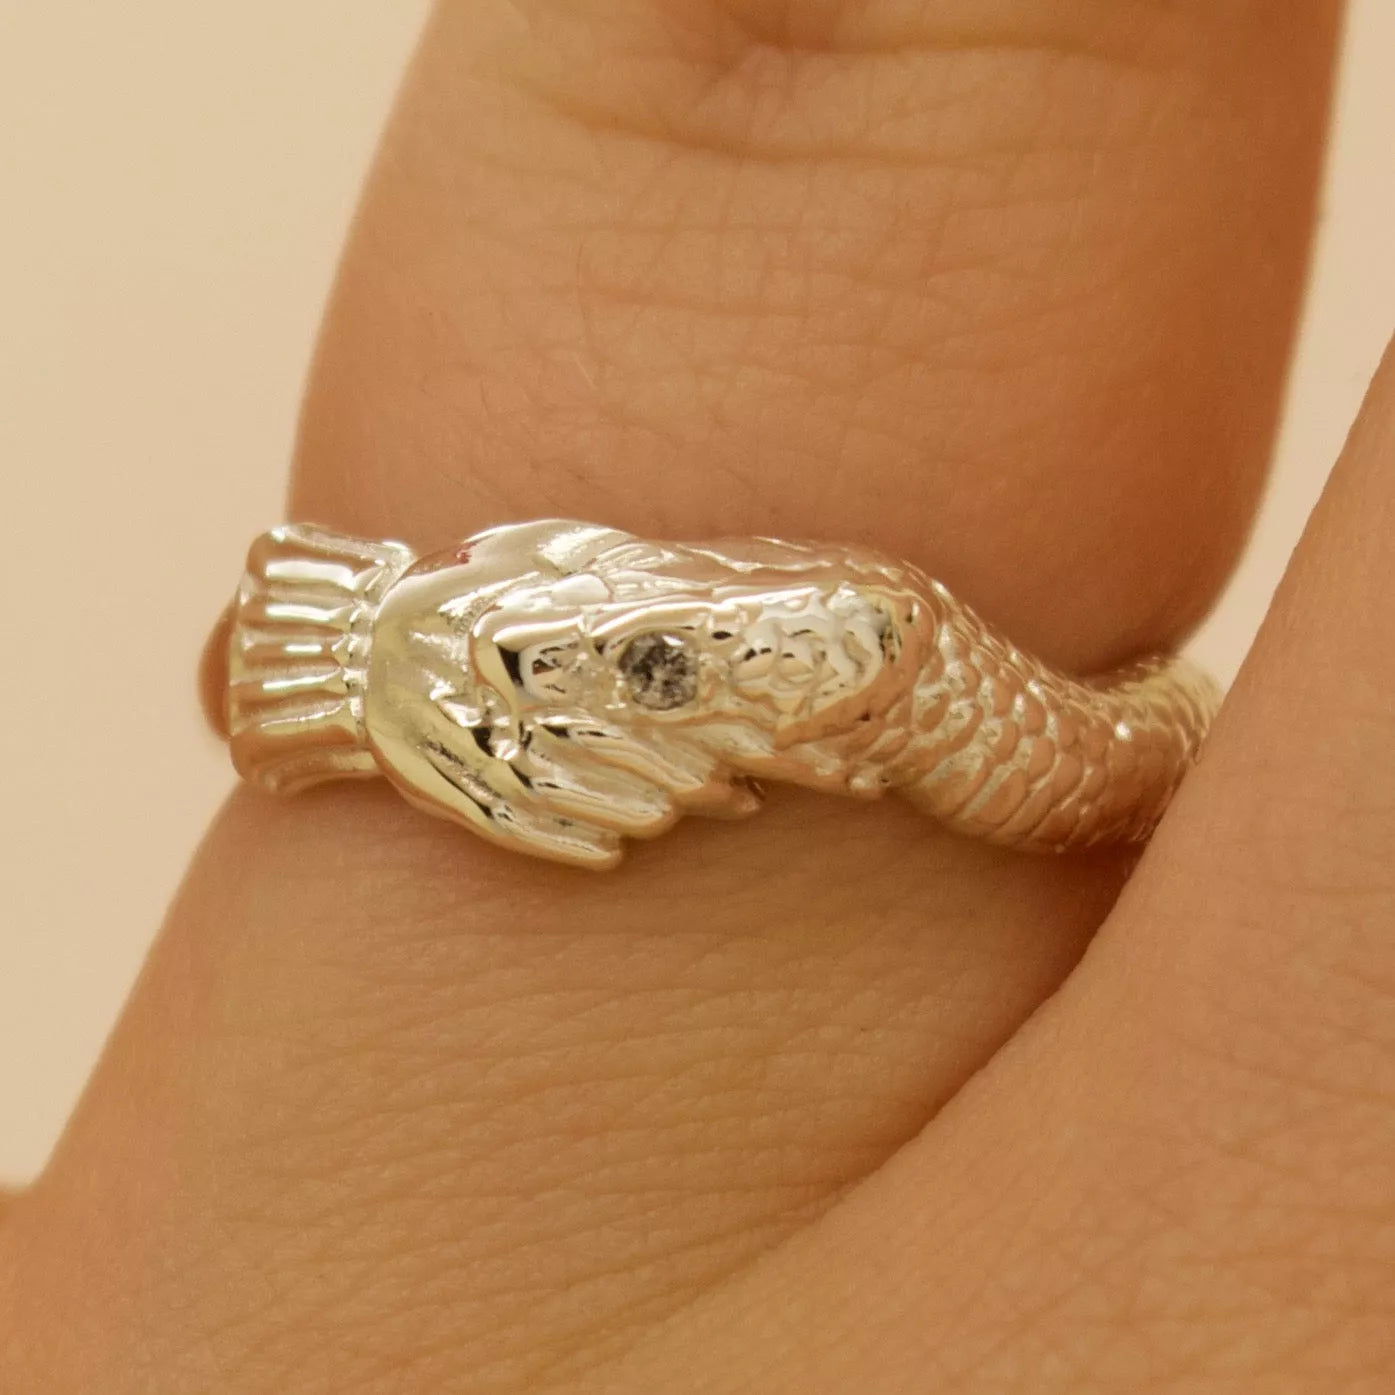 ‘Twice Shy Ring’ - Snake Bite Handshake Ring with Pepper Diamond Eye, Ring, Rings, The Serpents Club